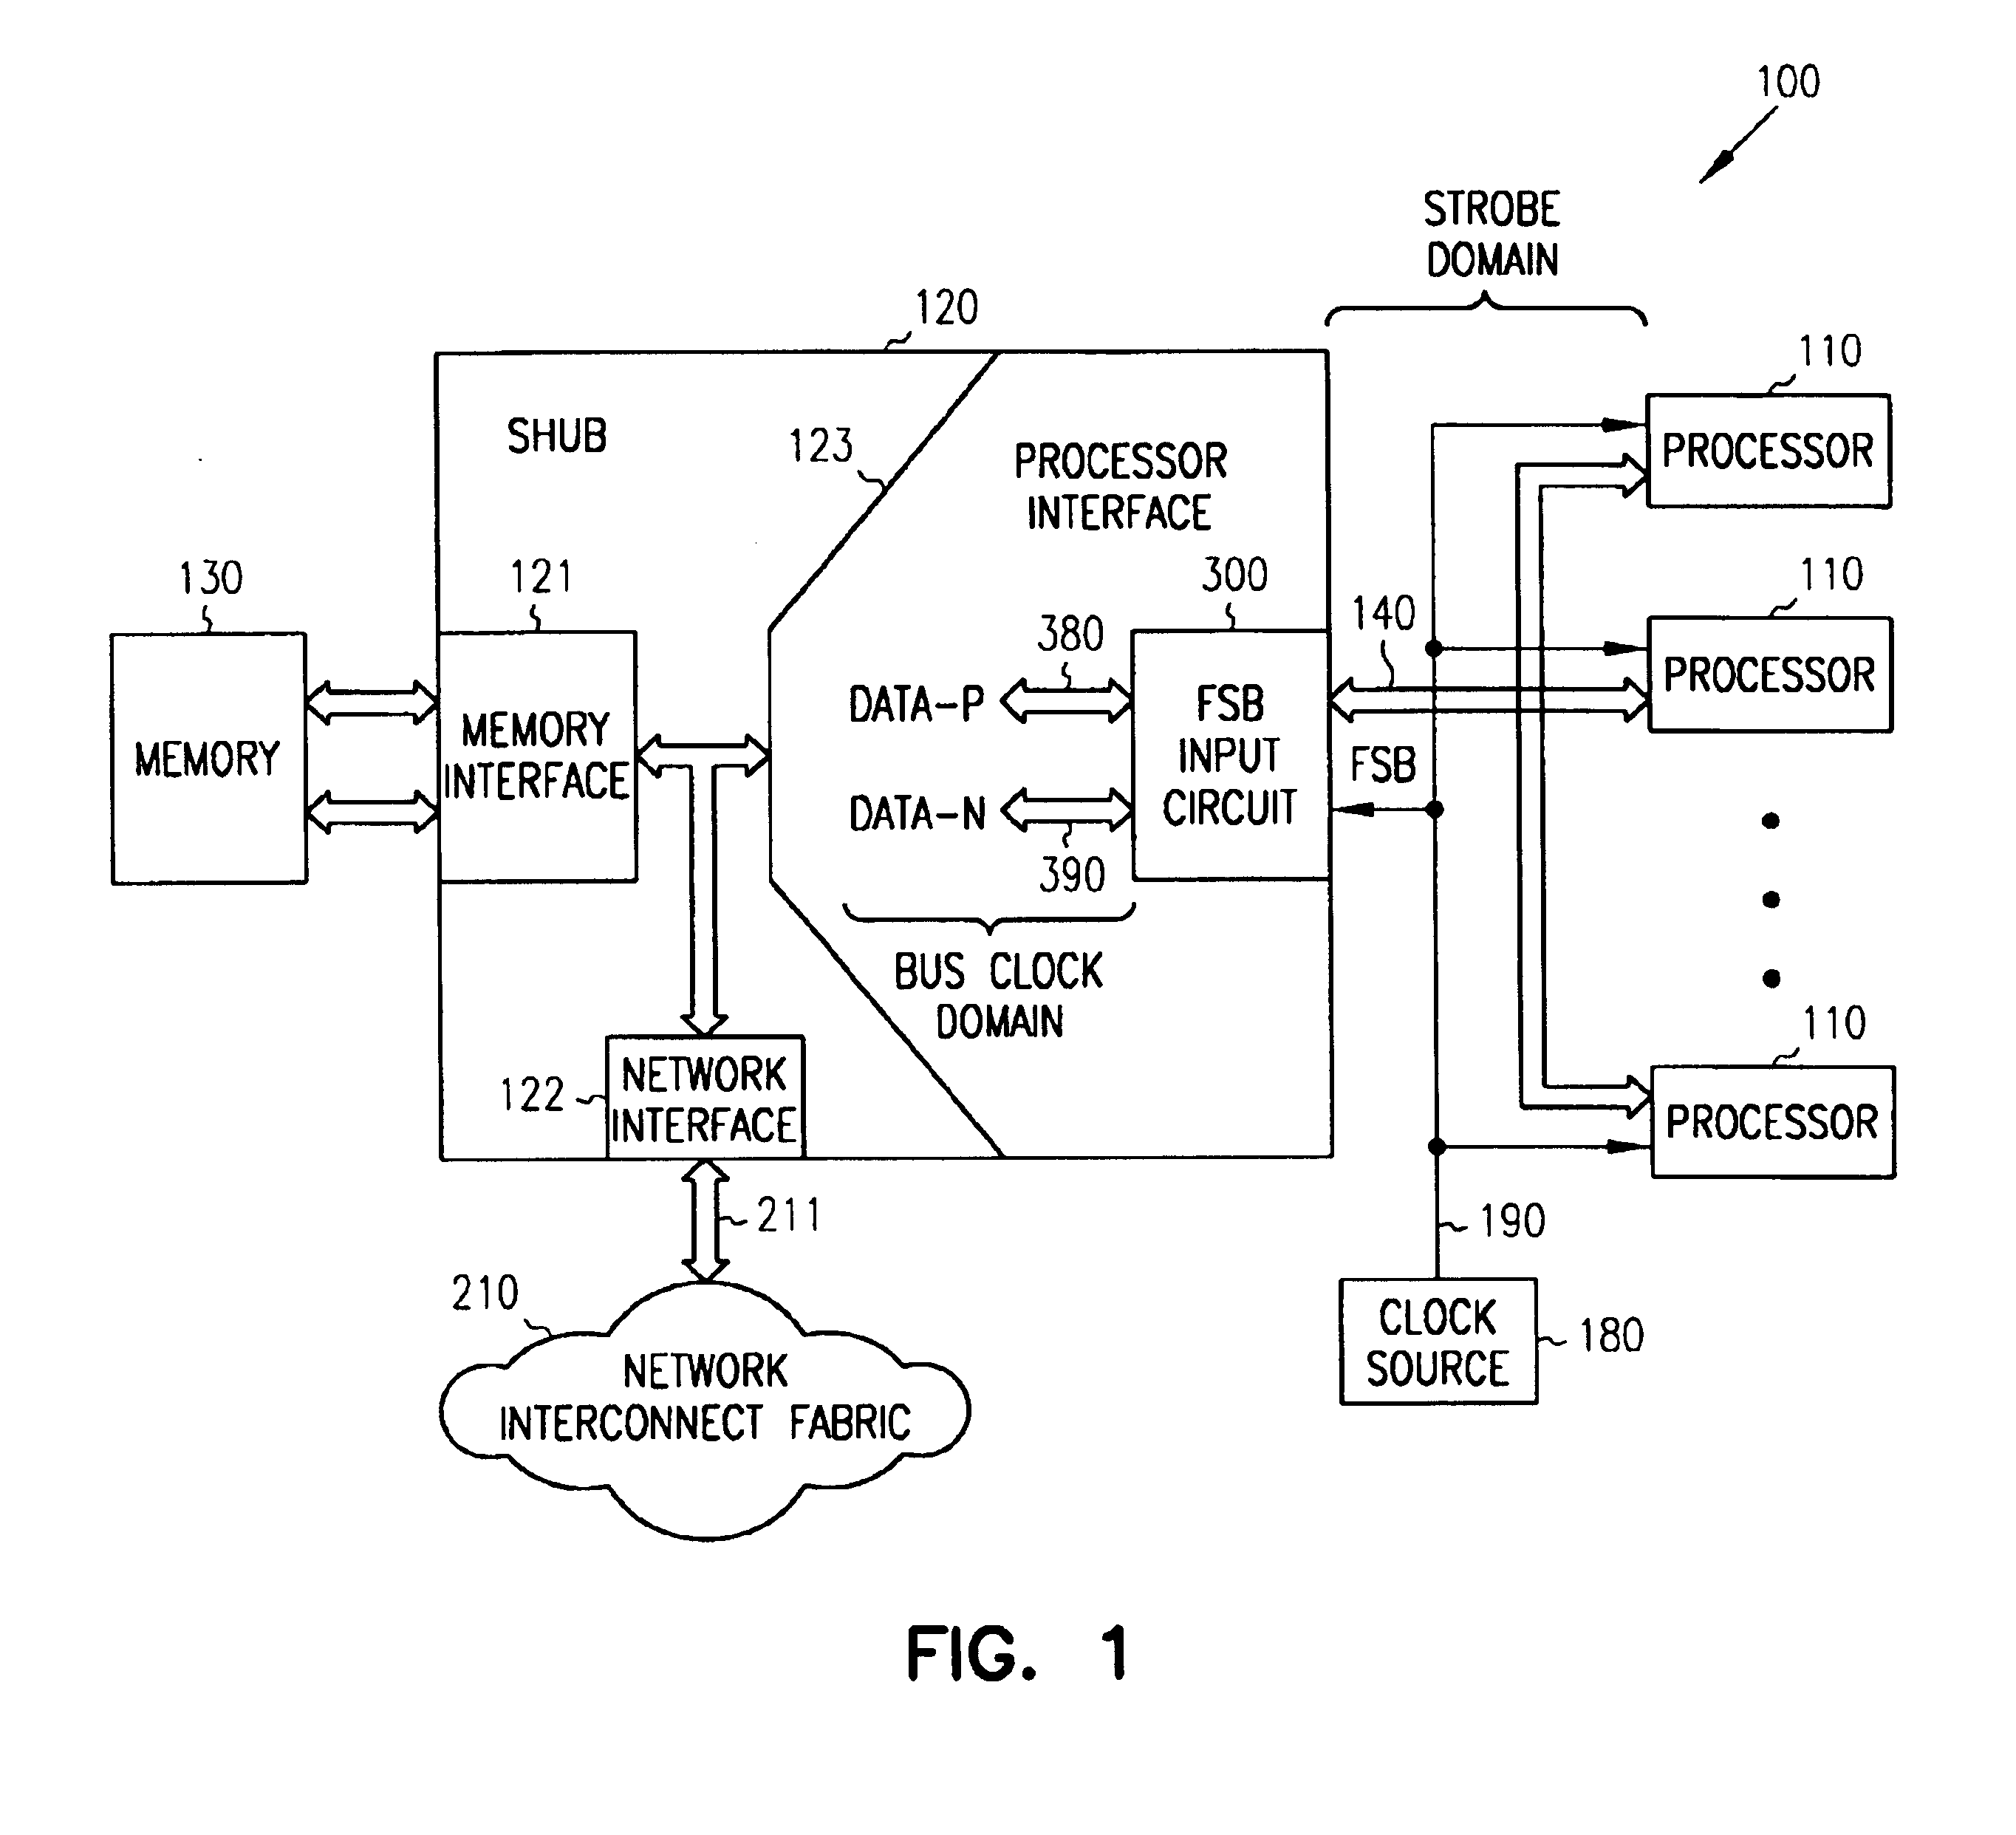 Method and circuit for reliable data capture in the presence of bus-master changeovers